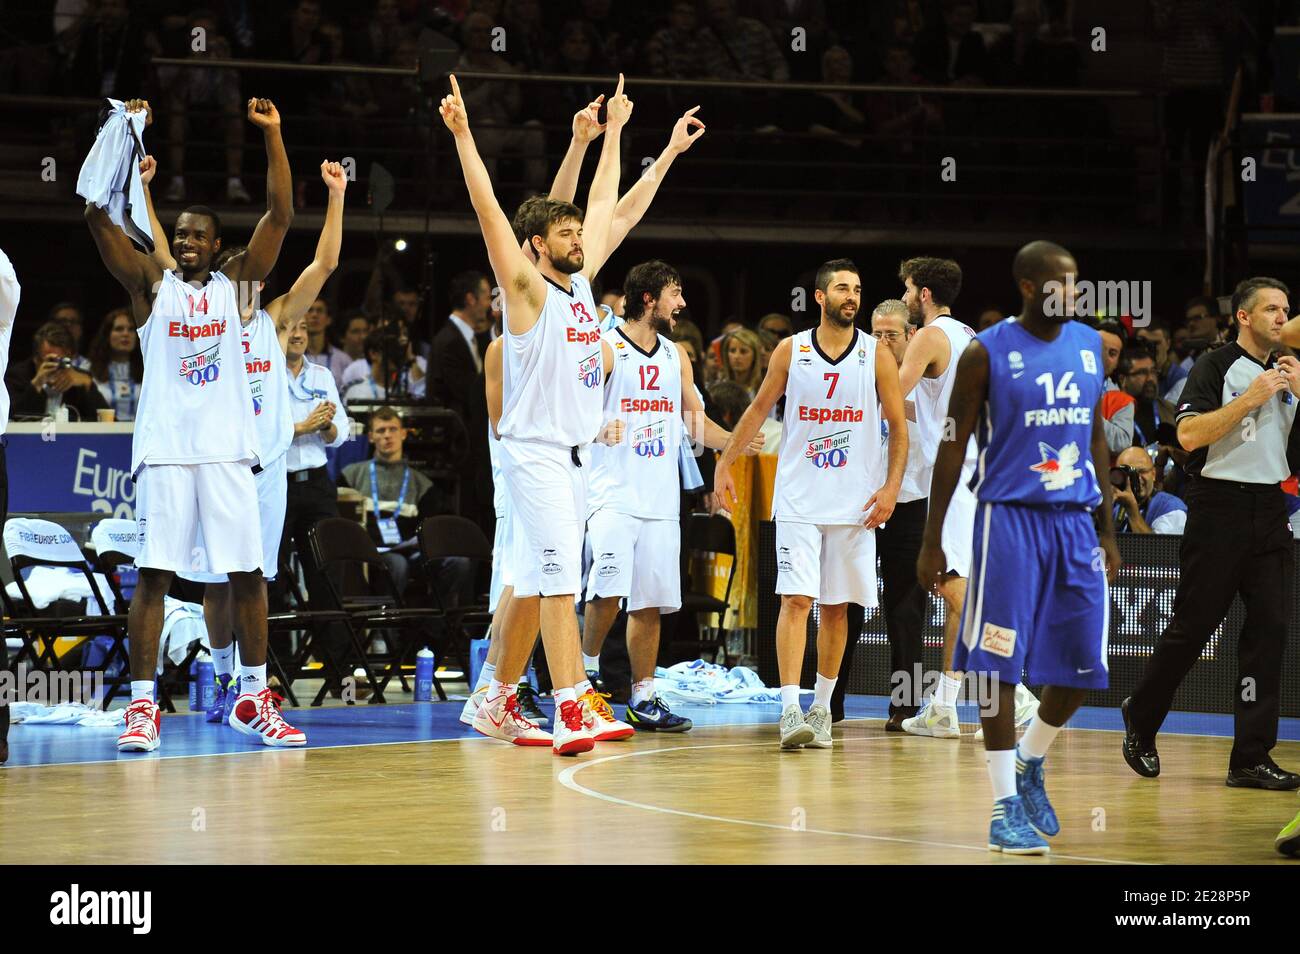 Spain's national team players celebrate winning after the Men European  Basketball Championship Final match, Spain Vs France in Kaunas, Lithuania  on September 18, 2011. Spain defeated France 98-85. The Spanish team won